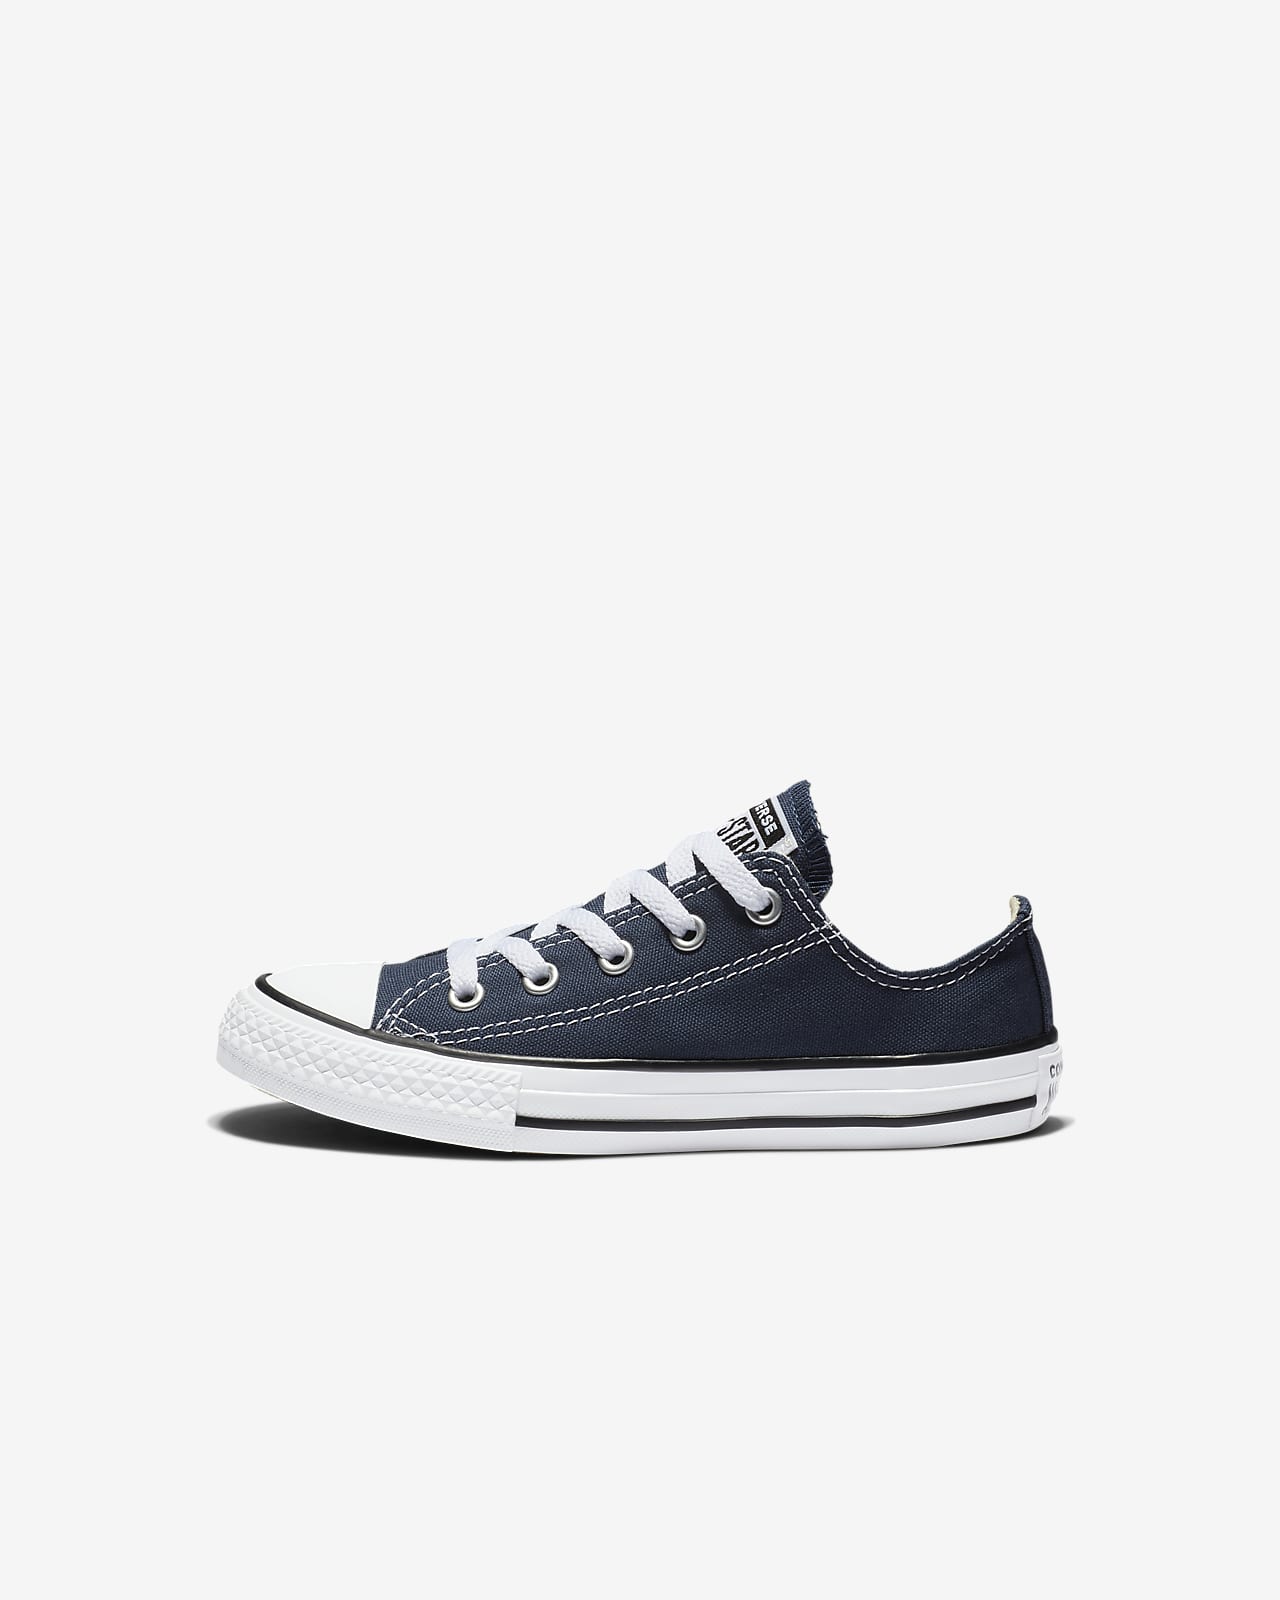 converse chuck taylor all star low top black